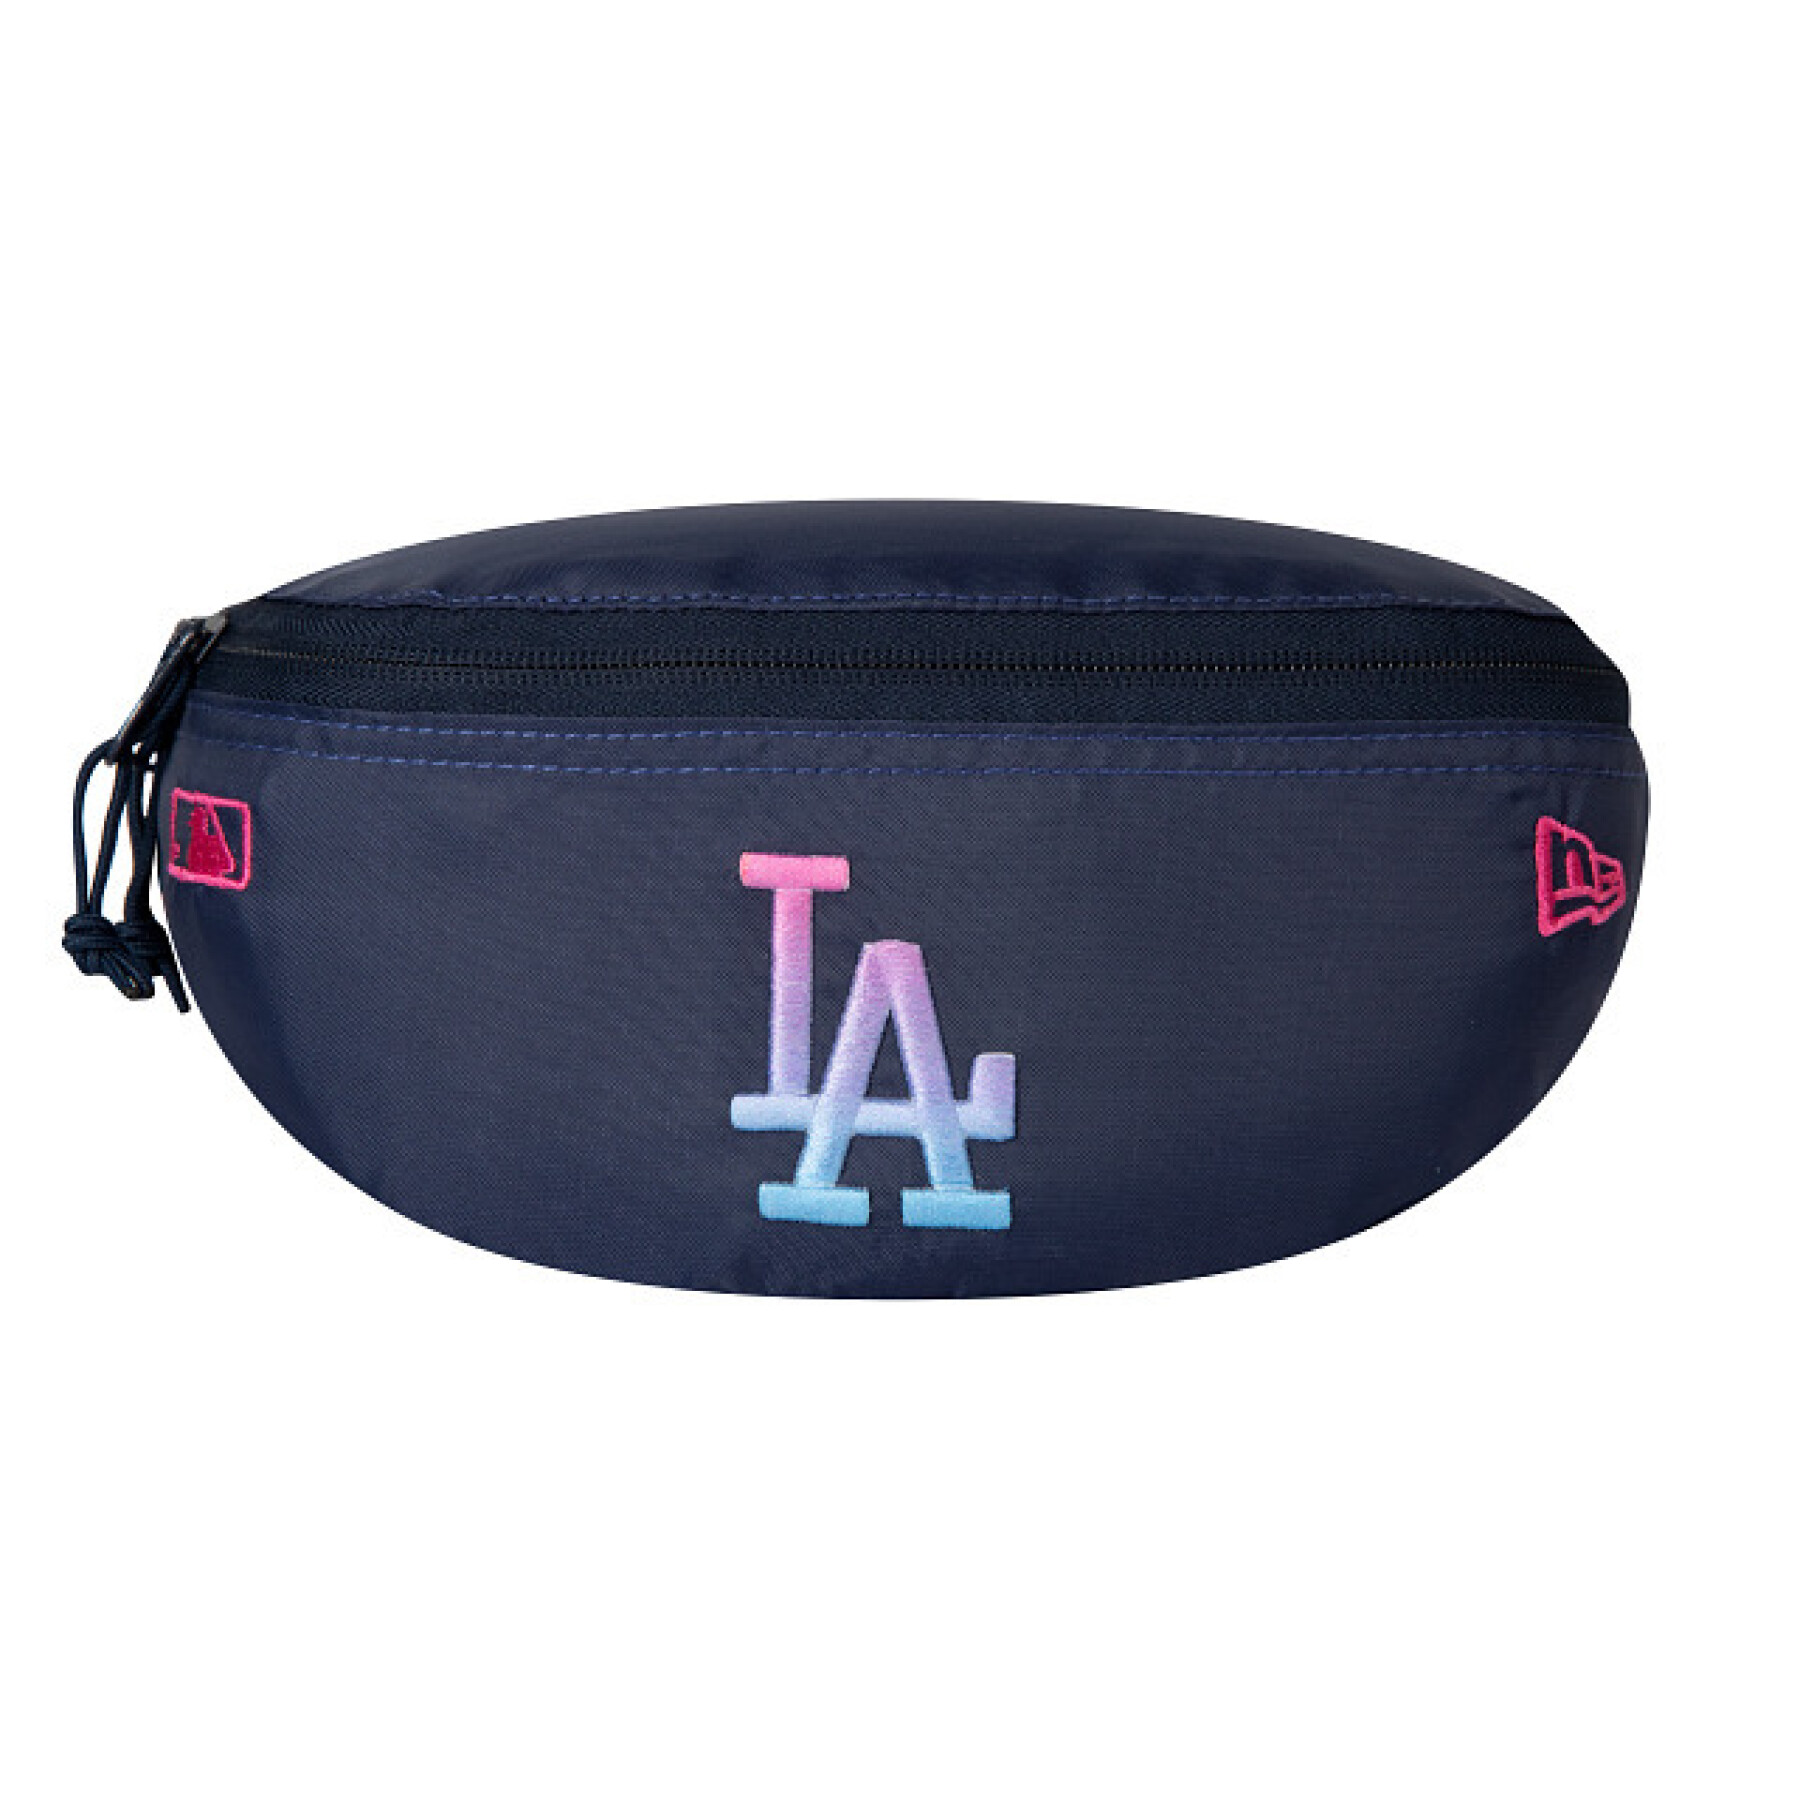 Fanny pack Los Angeles Dodgers MLB